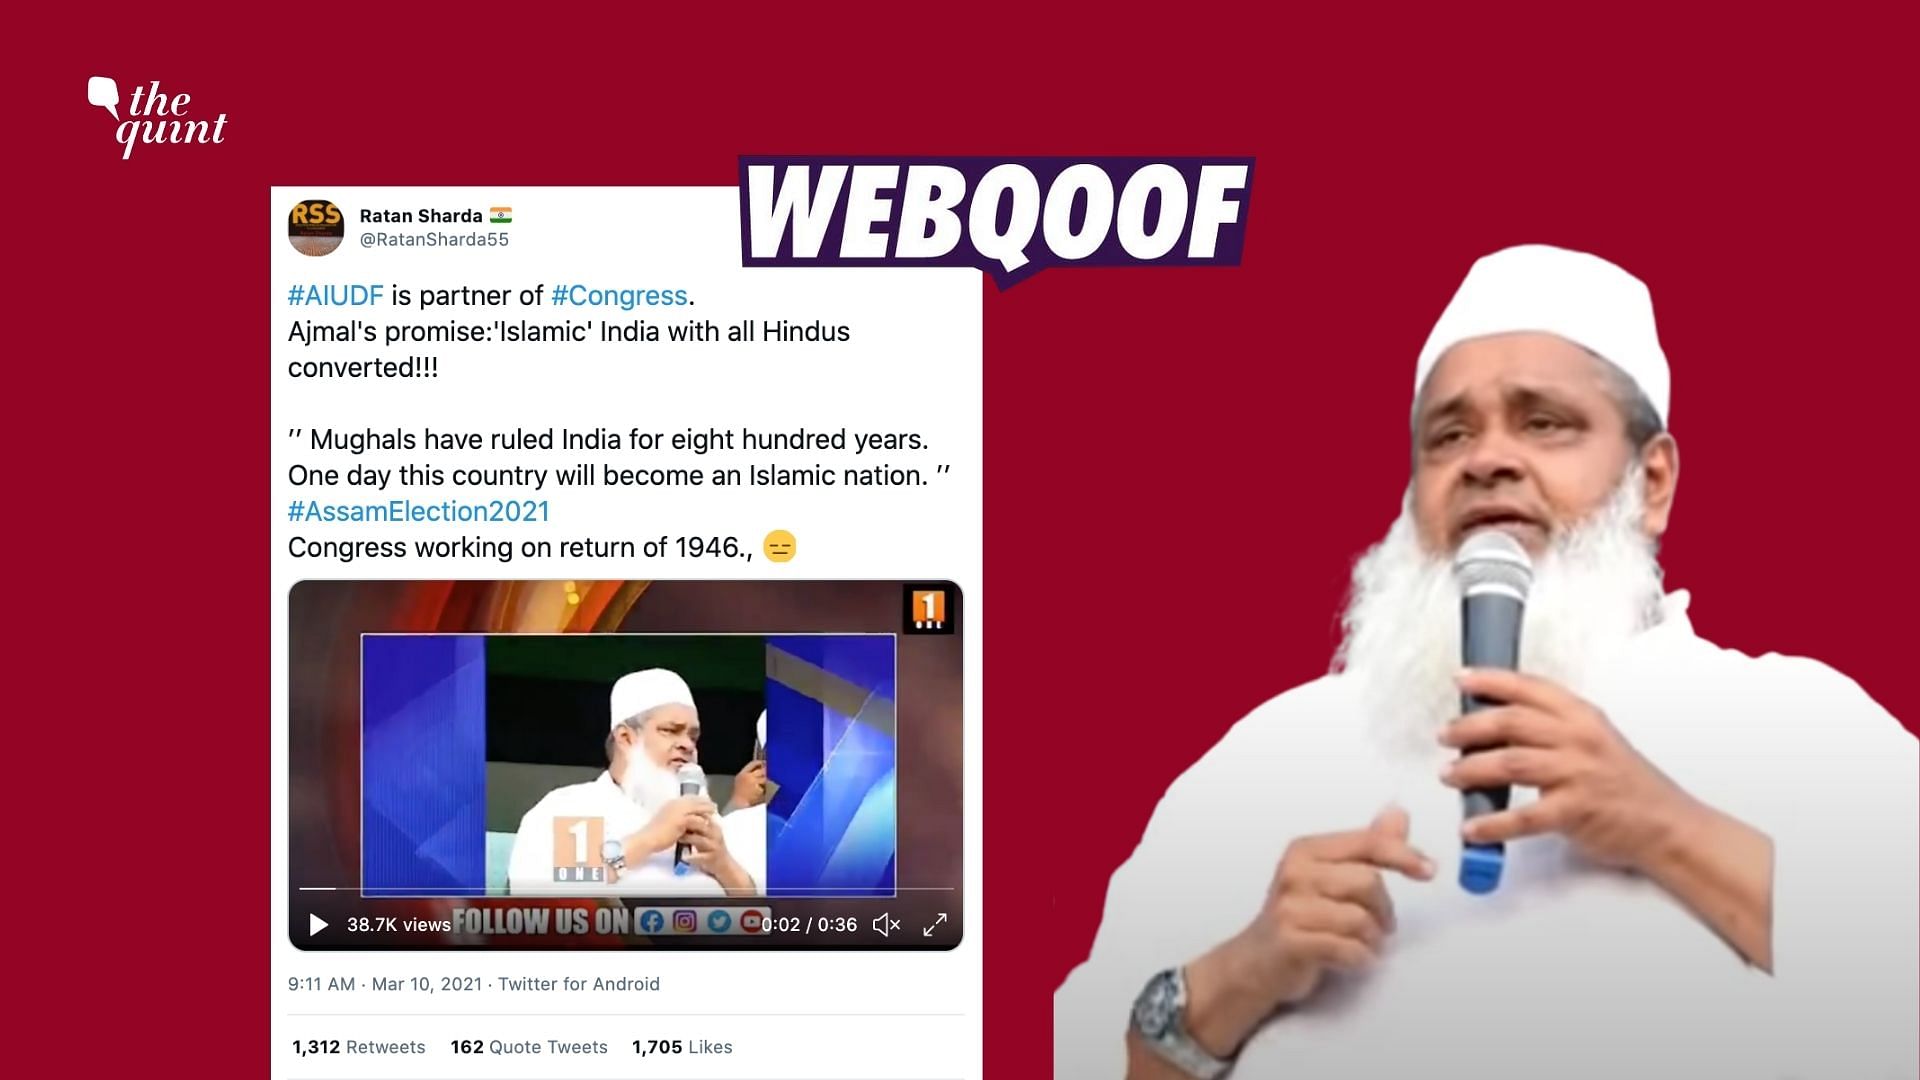 An edited clip of AIUDF Chief Badruddin Ajmal is being shared to falsely claim that he said that if the alliance is voted to power, India will become an “Islamic country”.